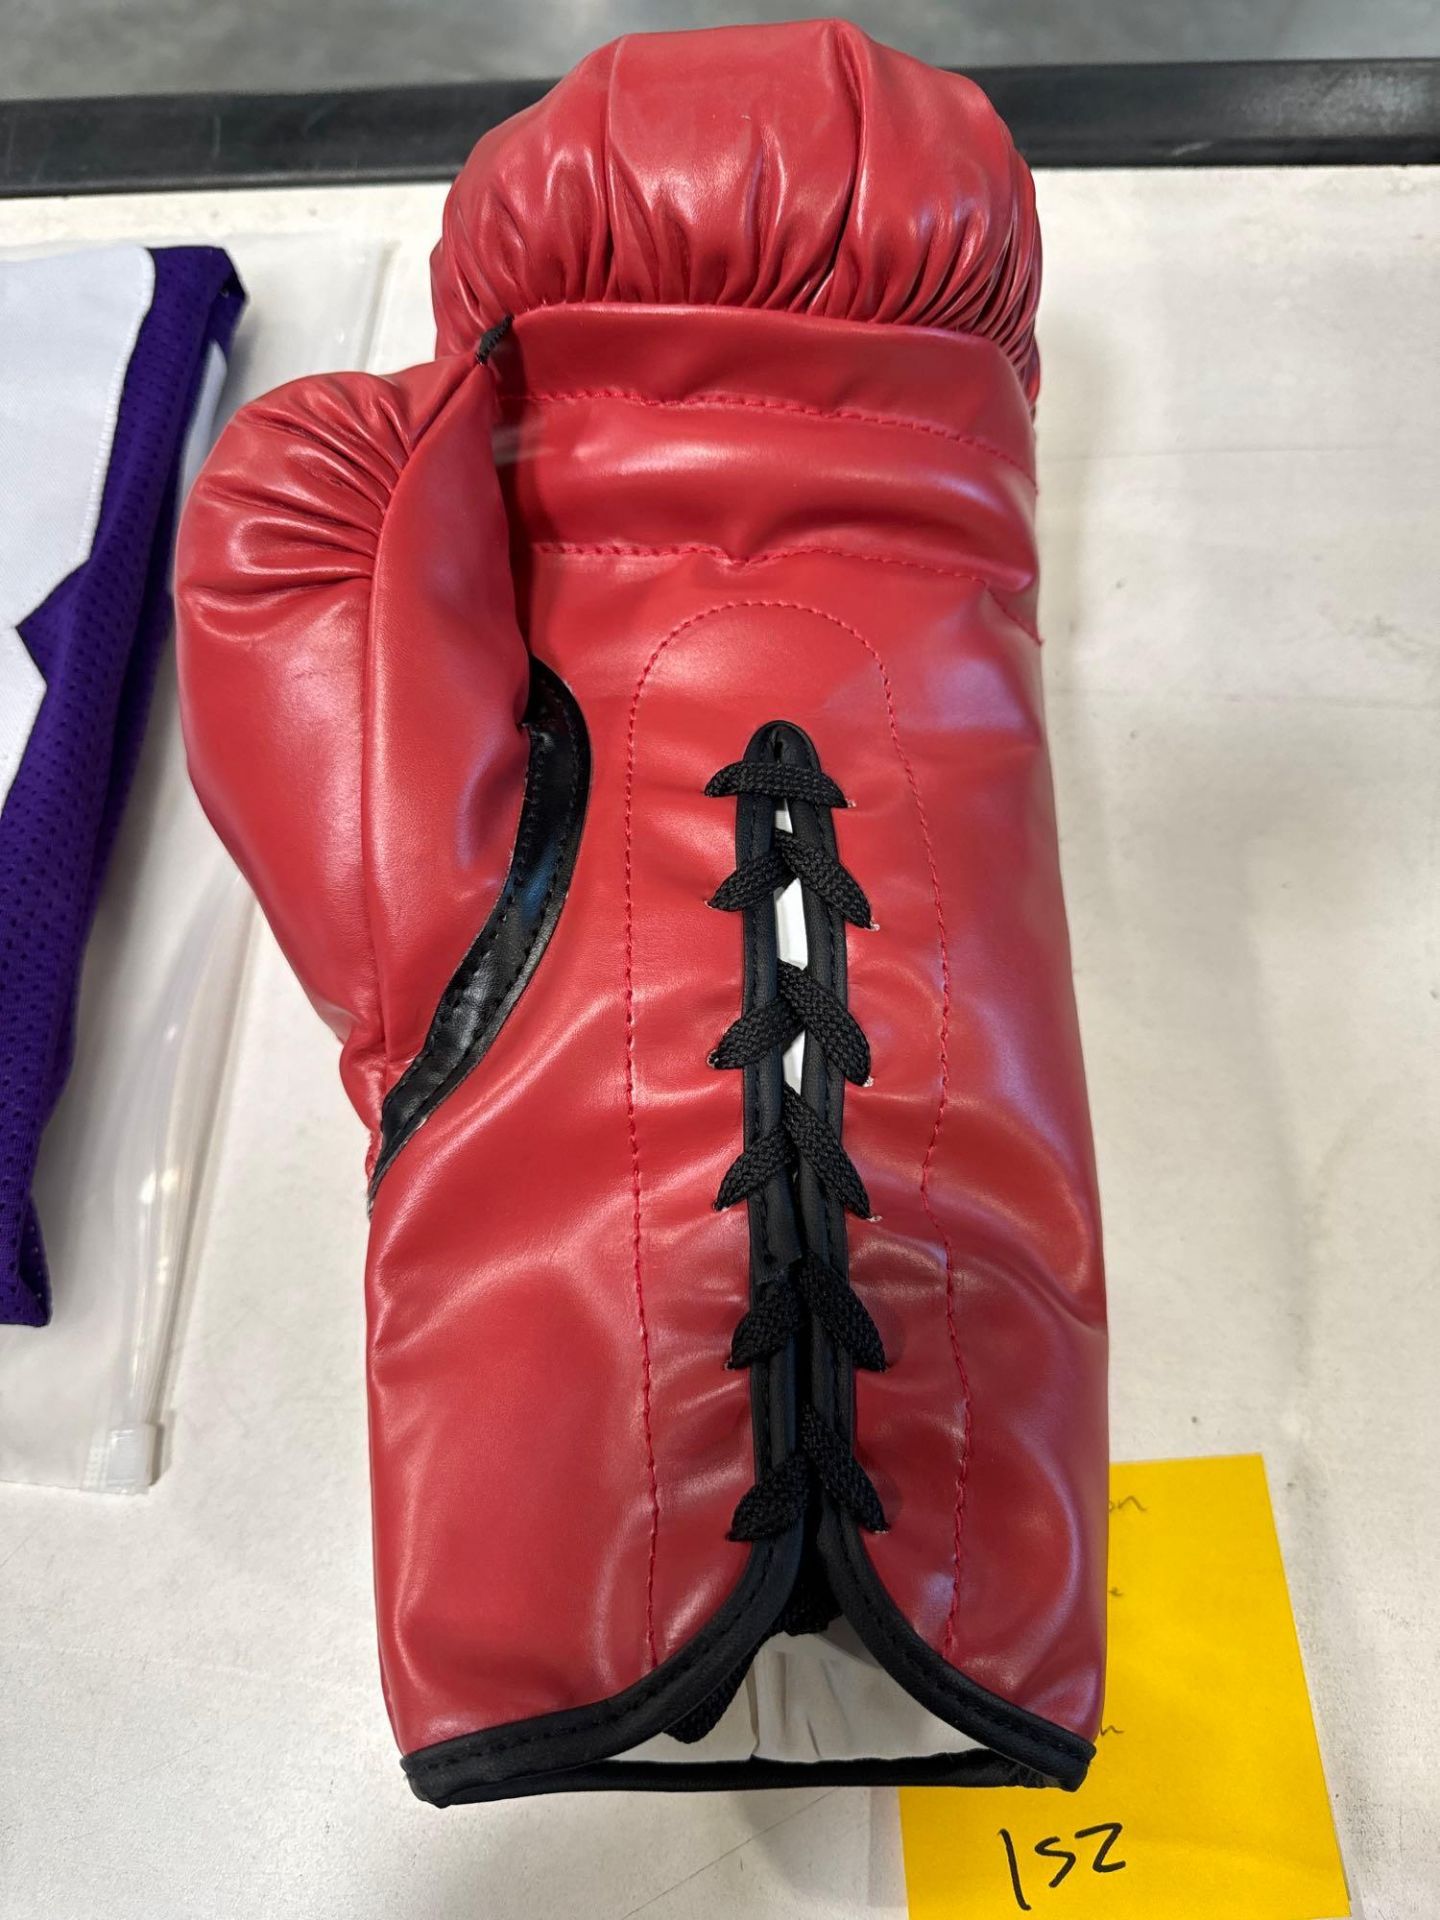 Mike Tyson signed glove (JSA authentic) - Image 2 of 3